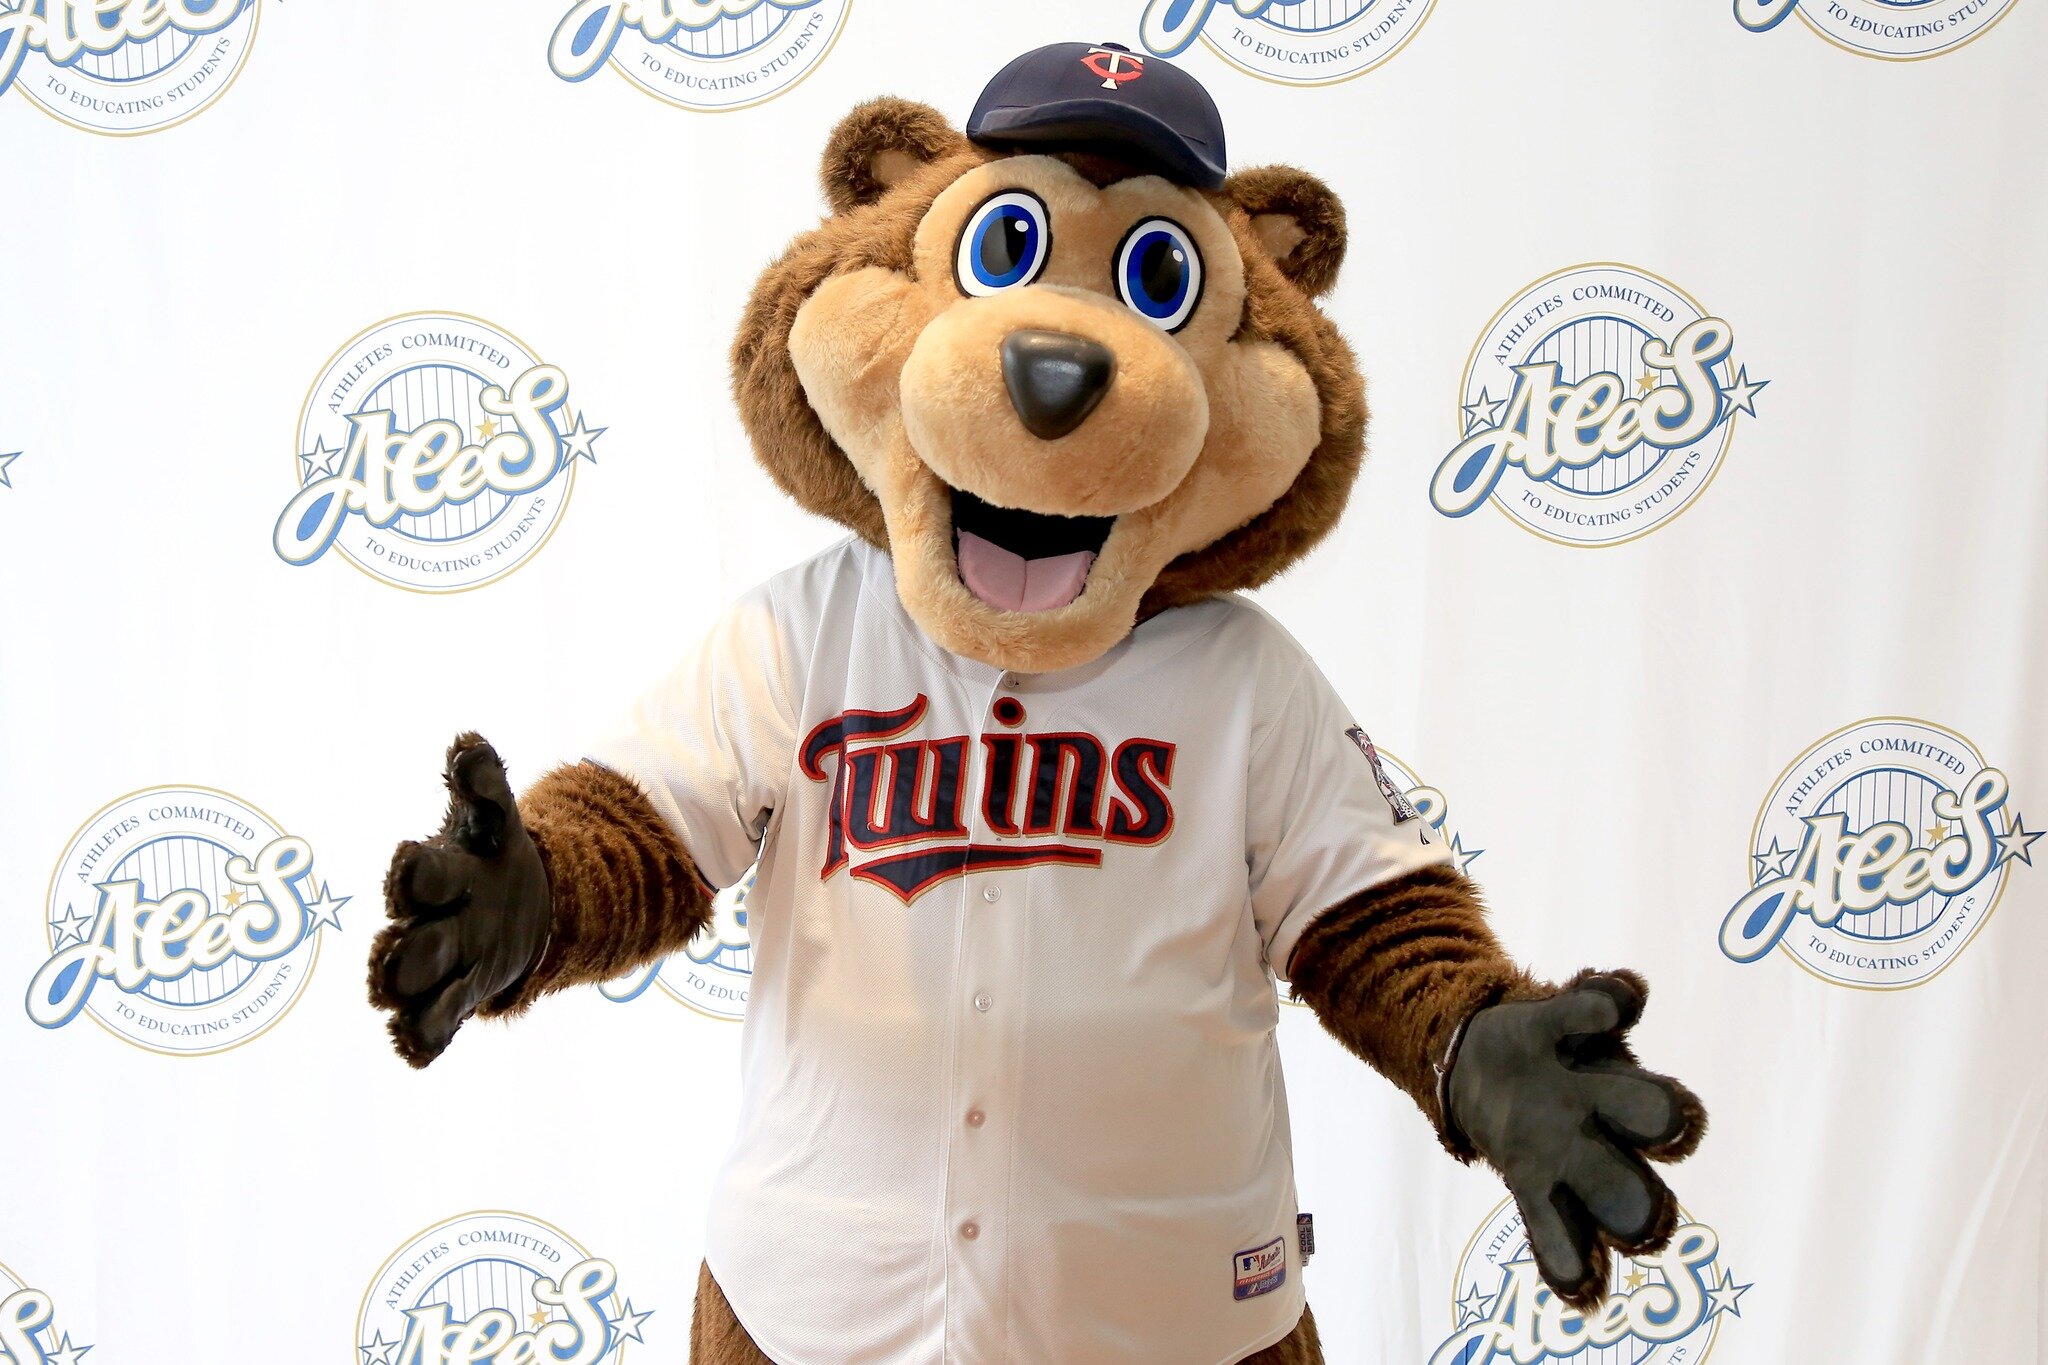 We love to see October baseball in Twins Territory. Let&rsquo;s go, @twins! #WeBelieveinTC